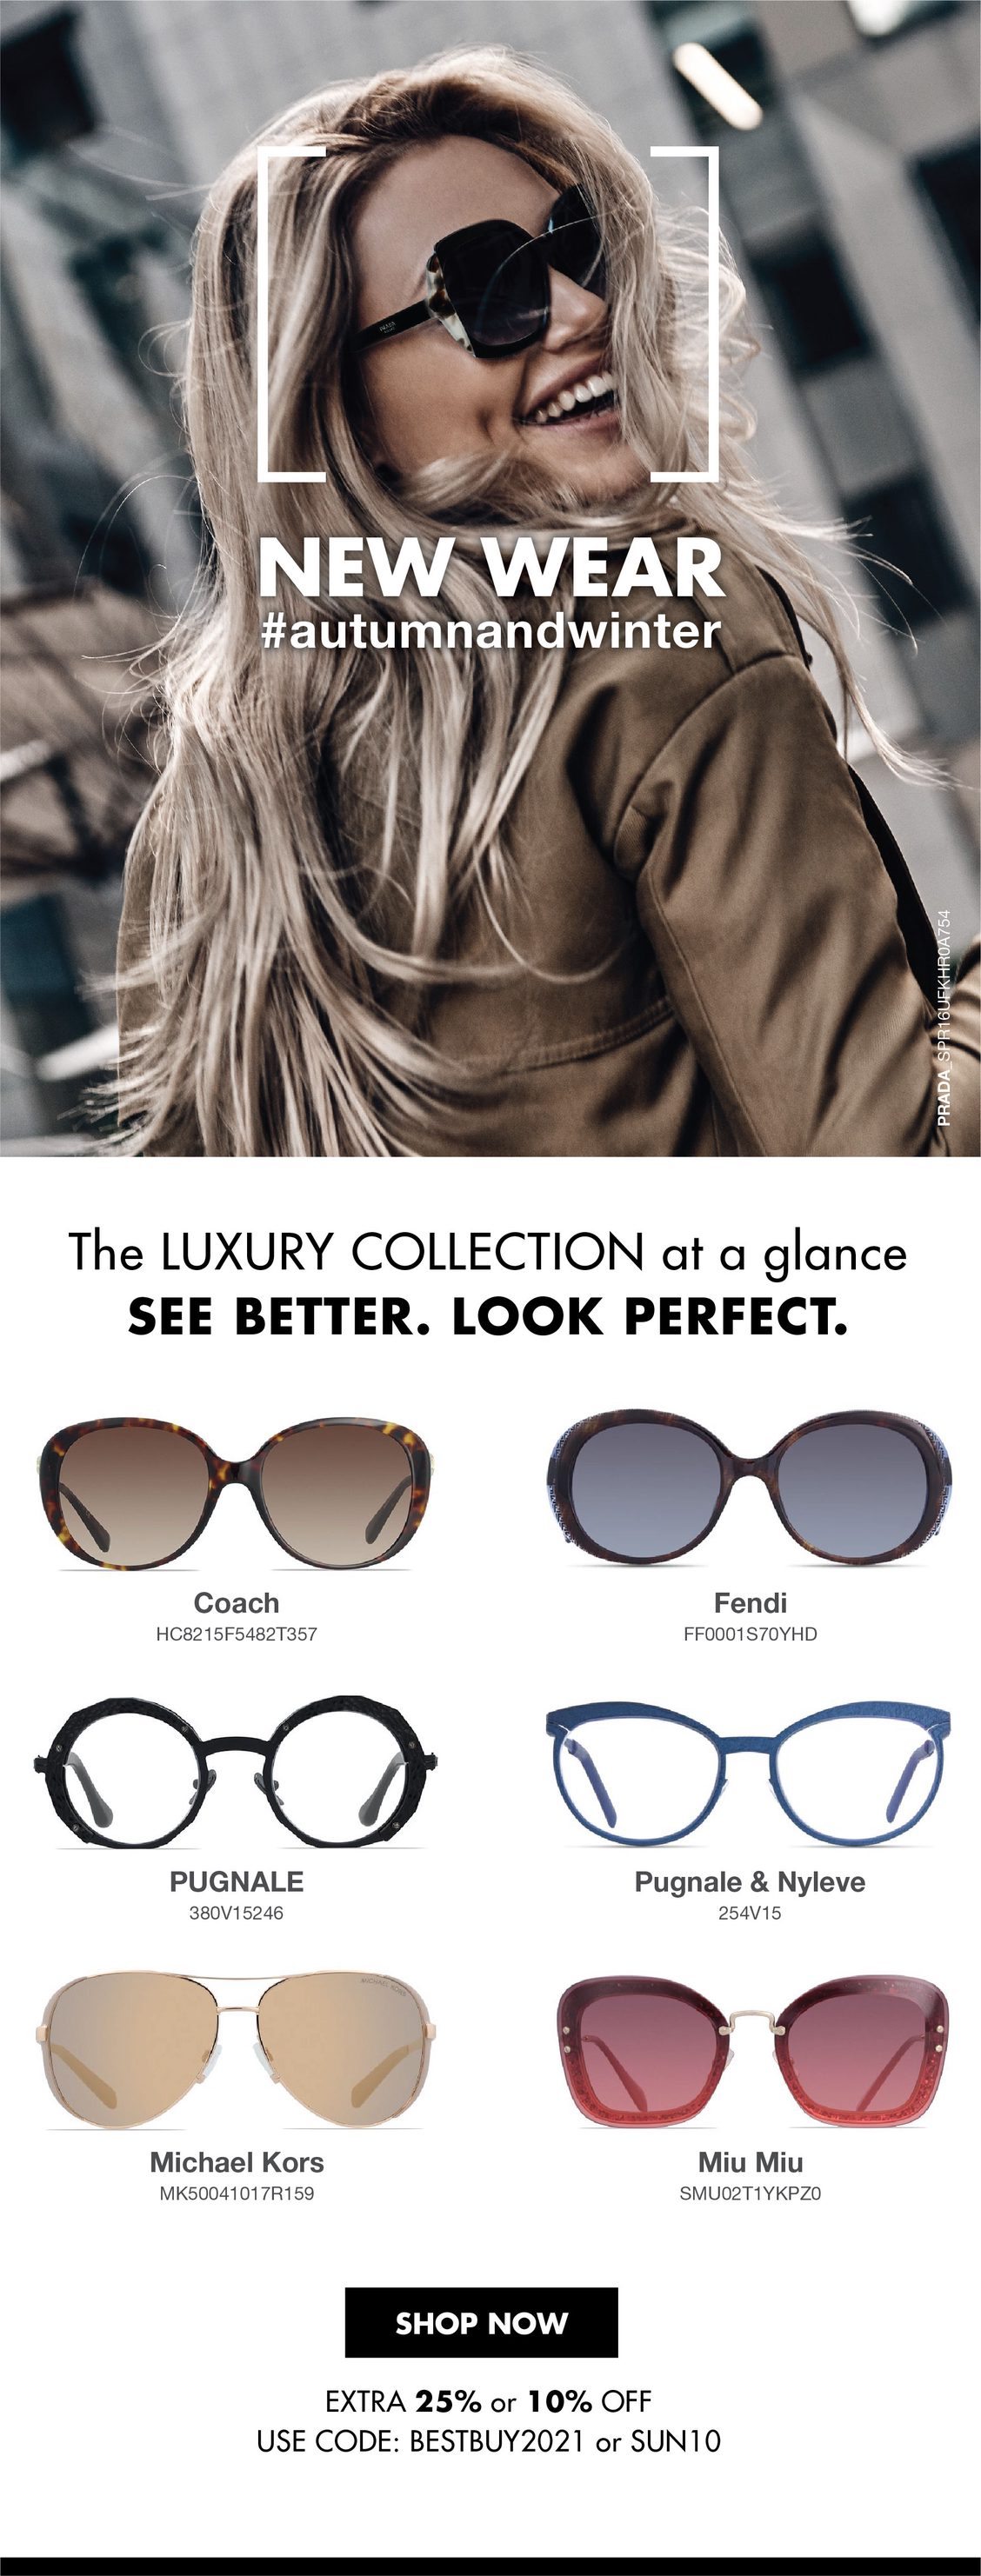 The Luxury Collection at a glance - GLASSES GALLERY - GLASSES GALLERY